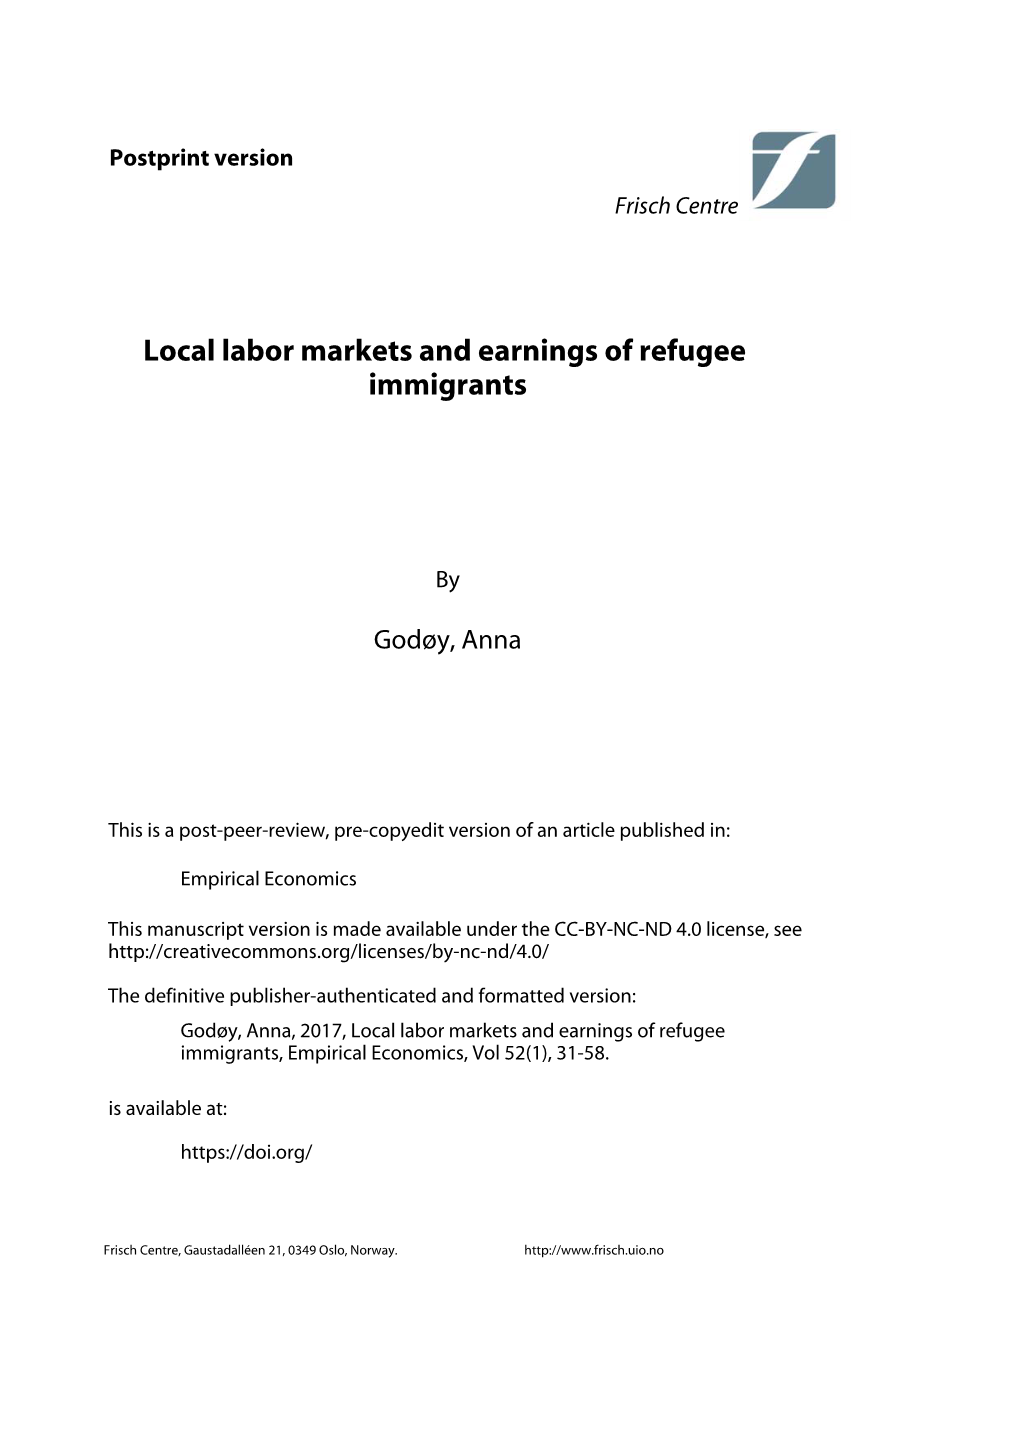 Local Labor Markets and Earnings of Refugee Immigrants